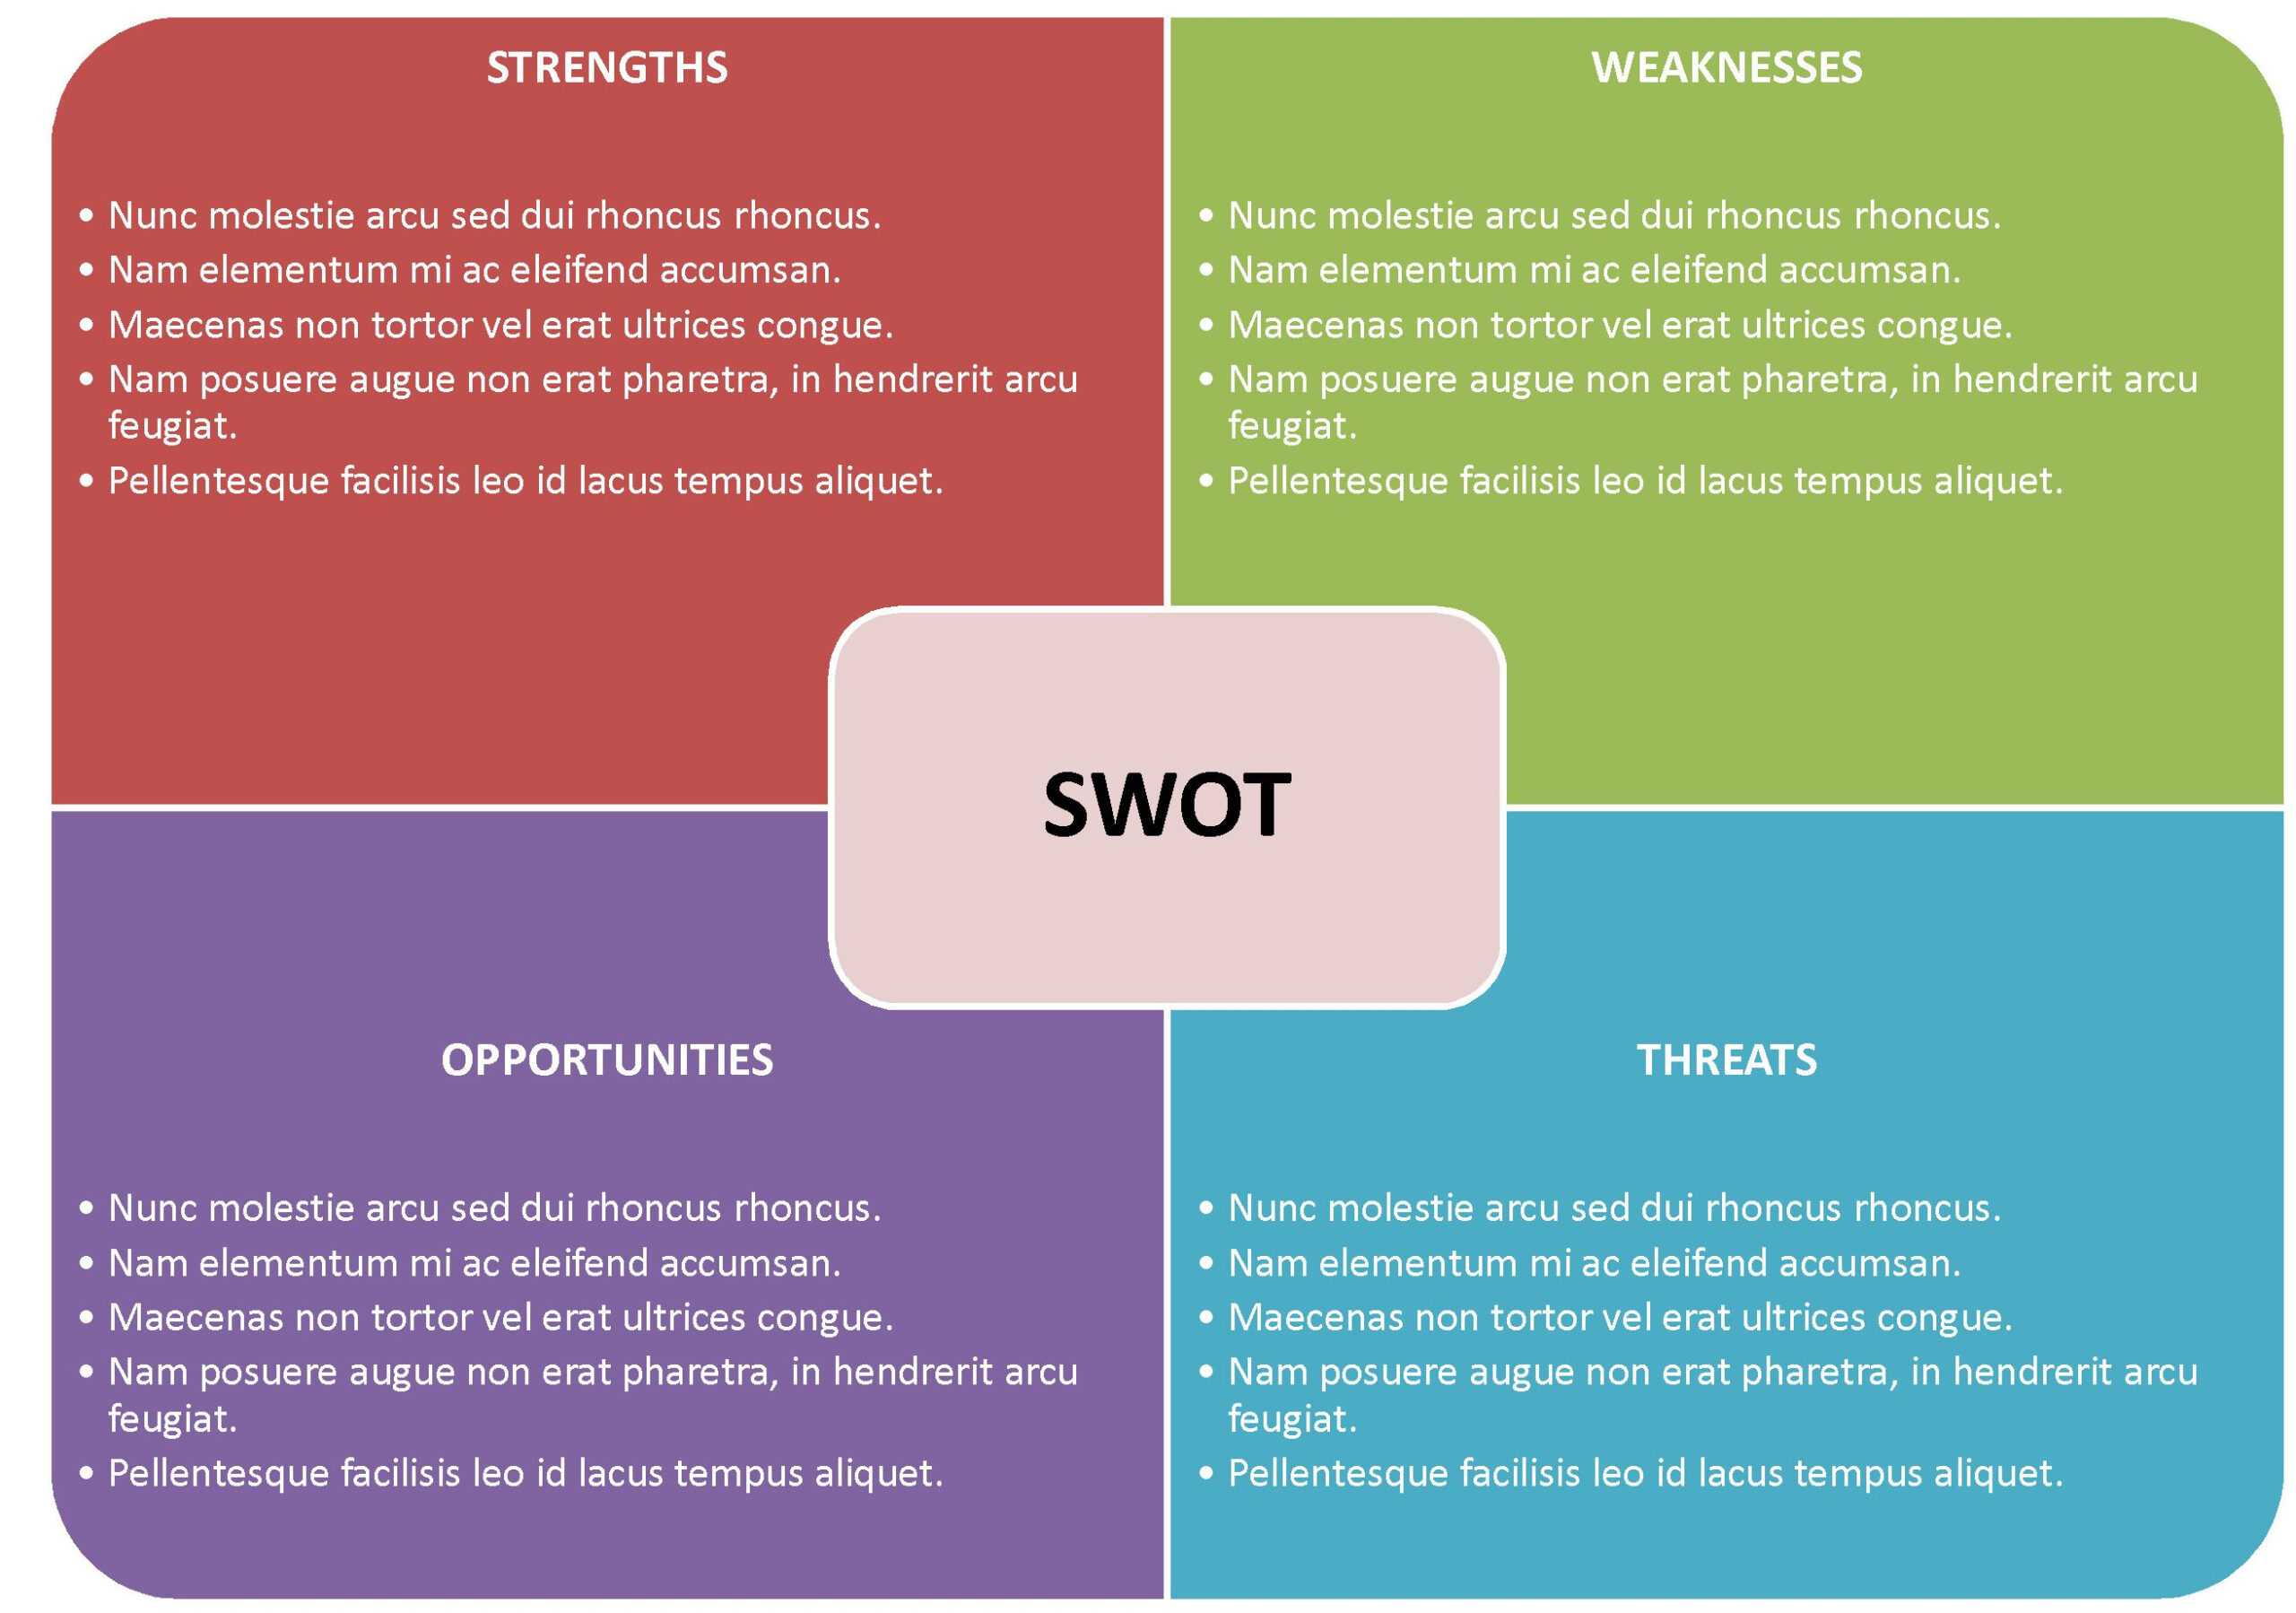 Ede79 Free Swot Template Word | Wiring Resources Throughout Swot Template For Word